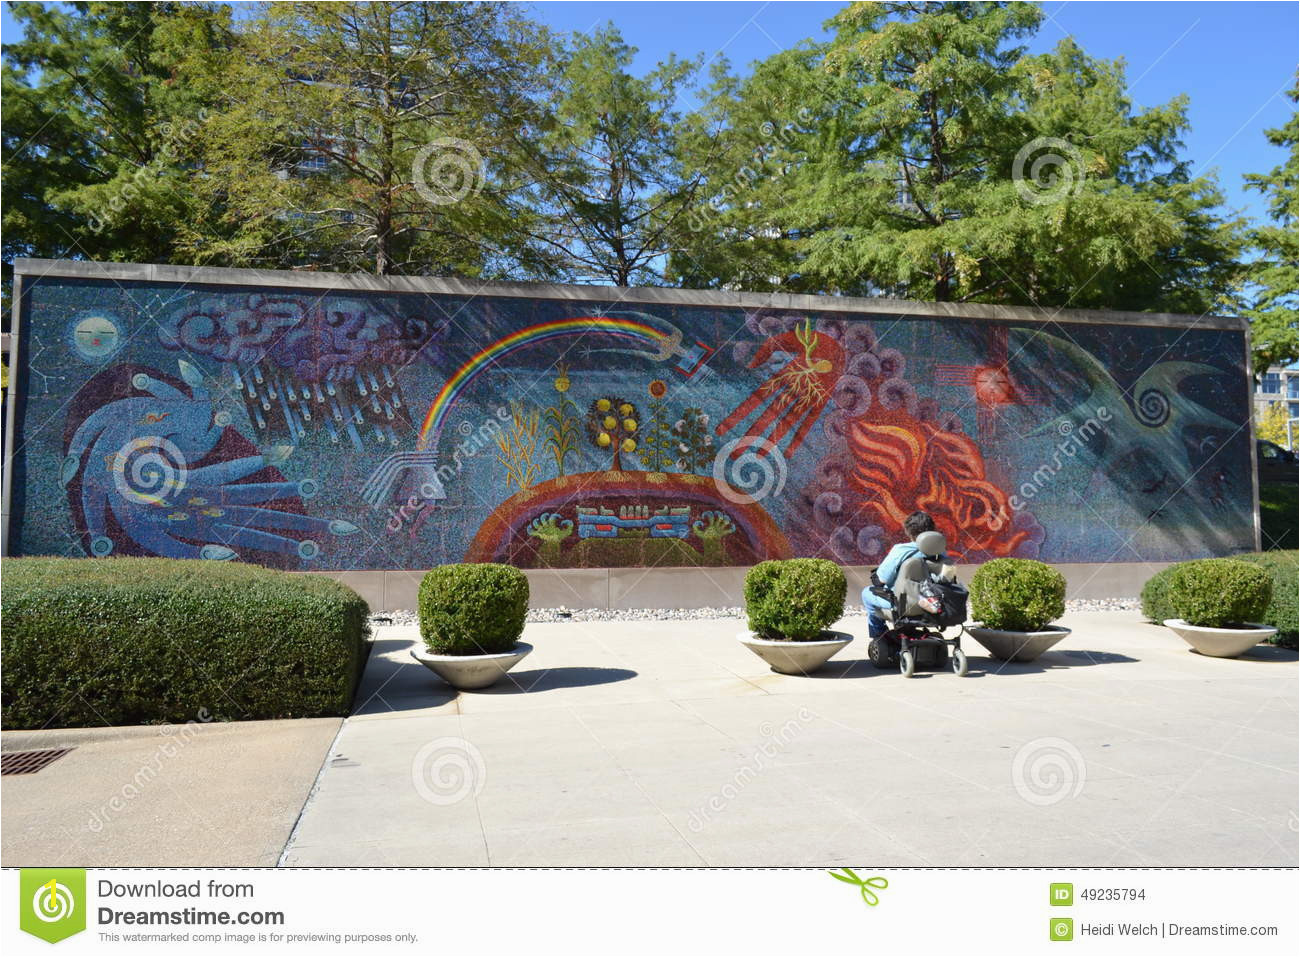 Looking at a mural painted on a wall outside the Dallas Museum of Art one person in a wheelchair can be seen studying the mural